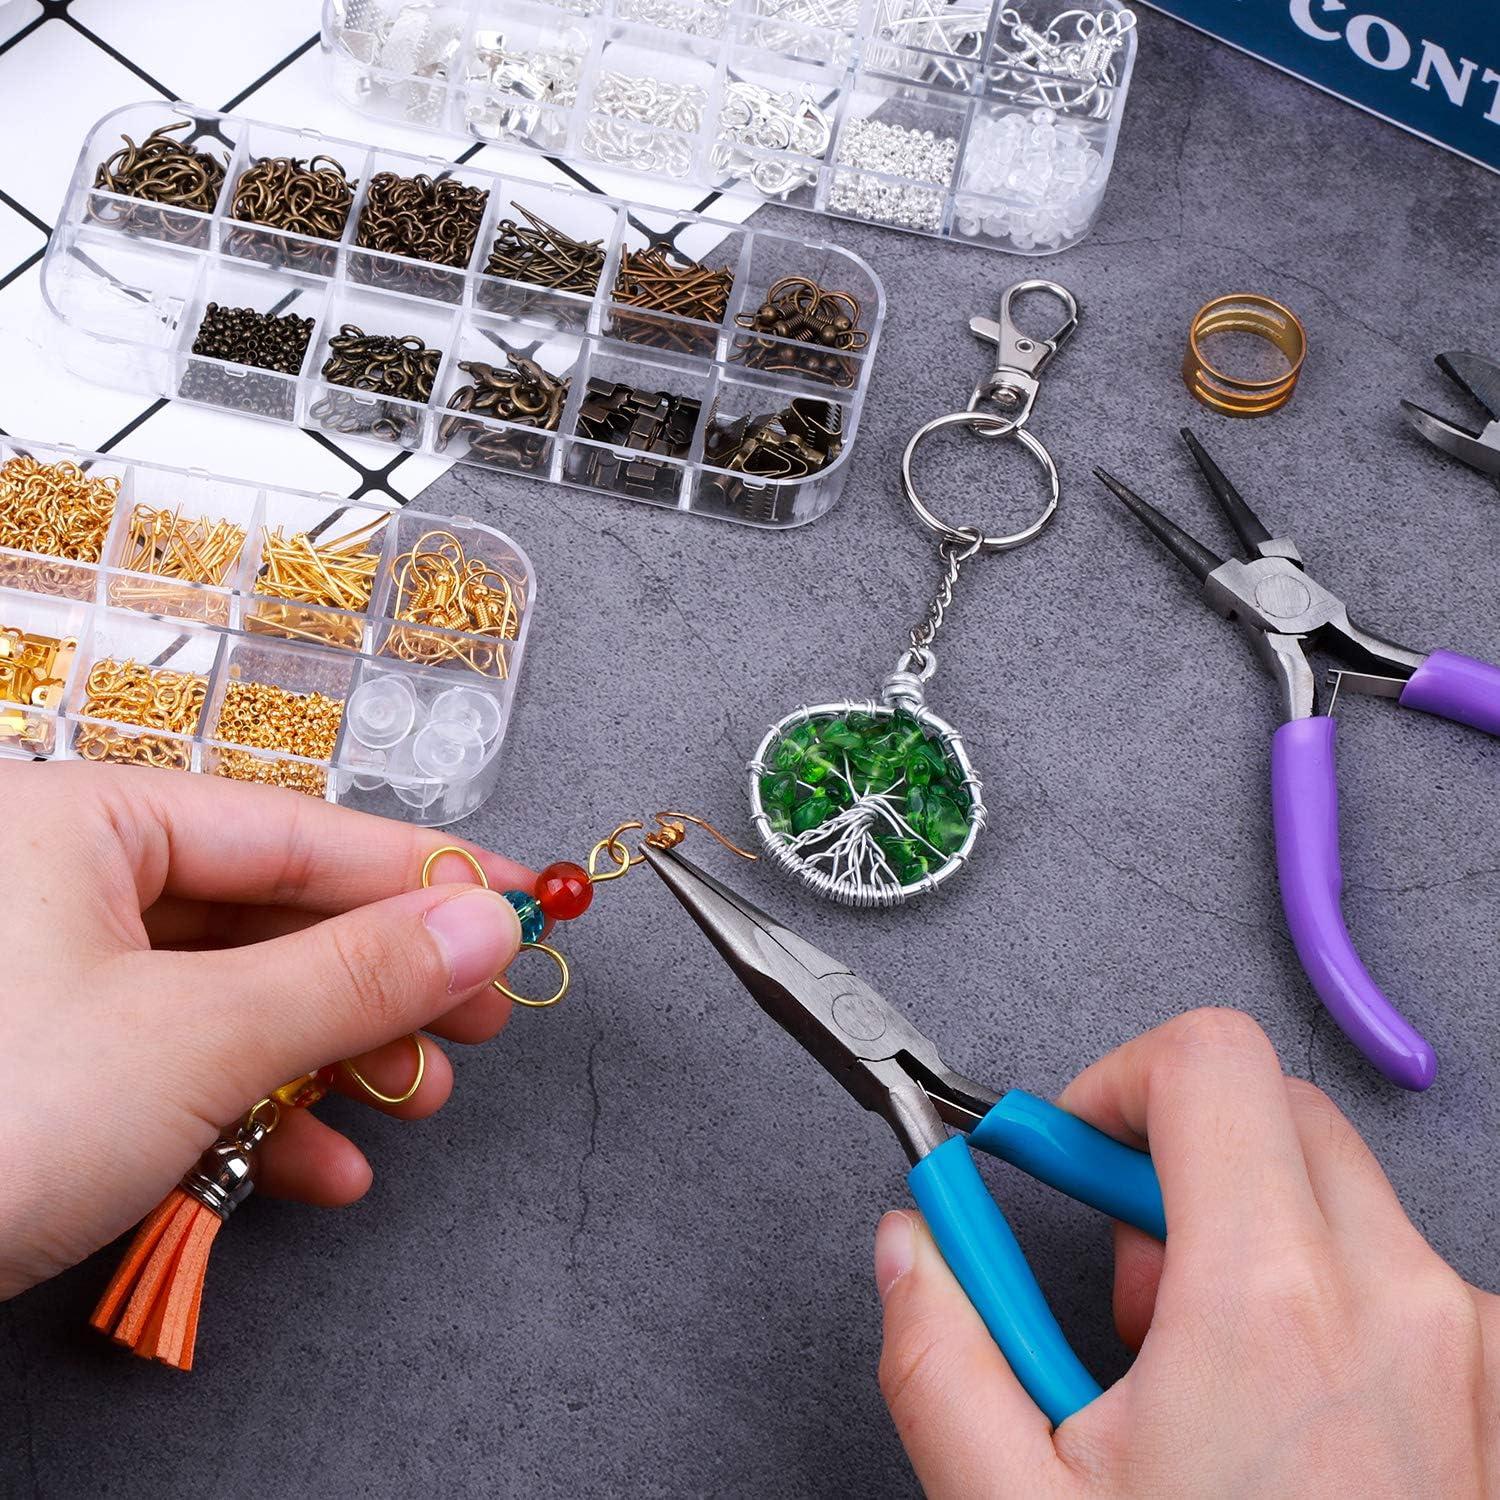 Jewelry Necklace Repair Kit Jump Rings Clasps and Earring Hooks 100 Gram